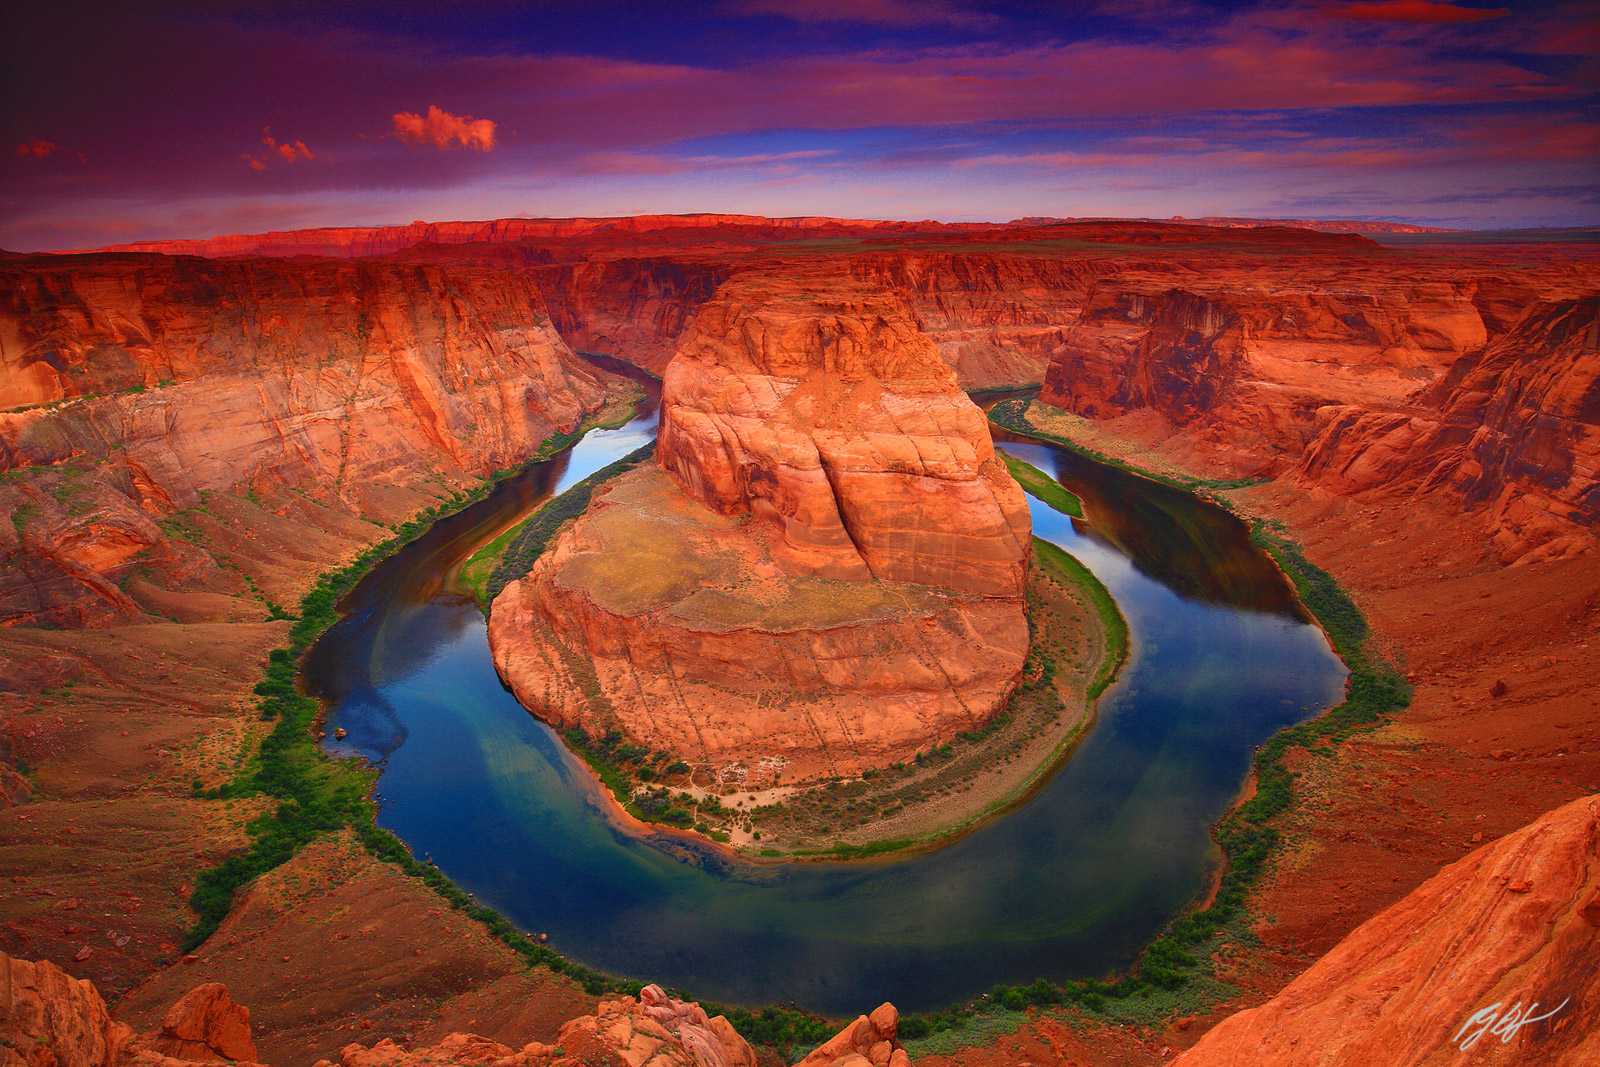 Sunrise over Horseshoe Bend and the Colorado River in Glen Canyon National Recreation Area in Arizona